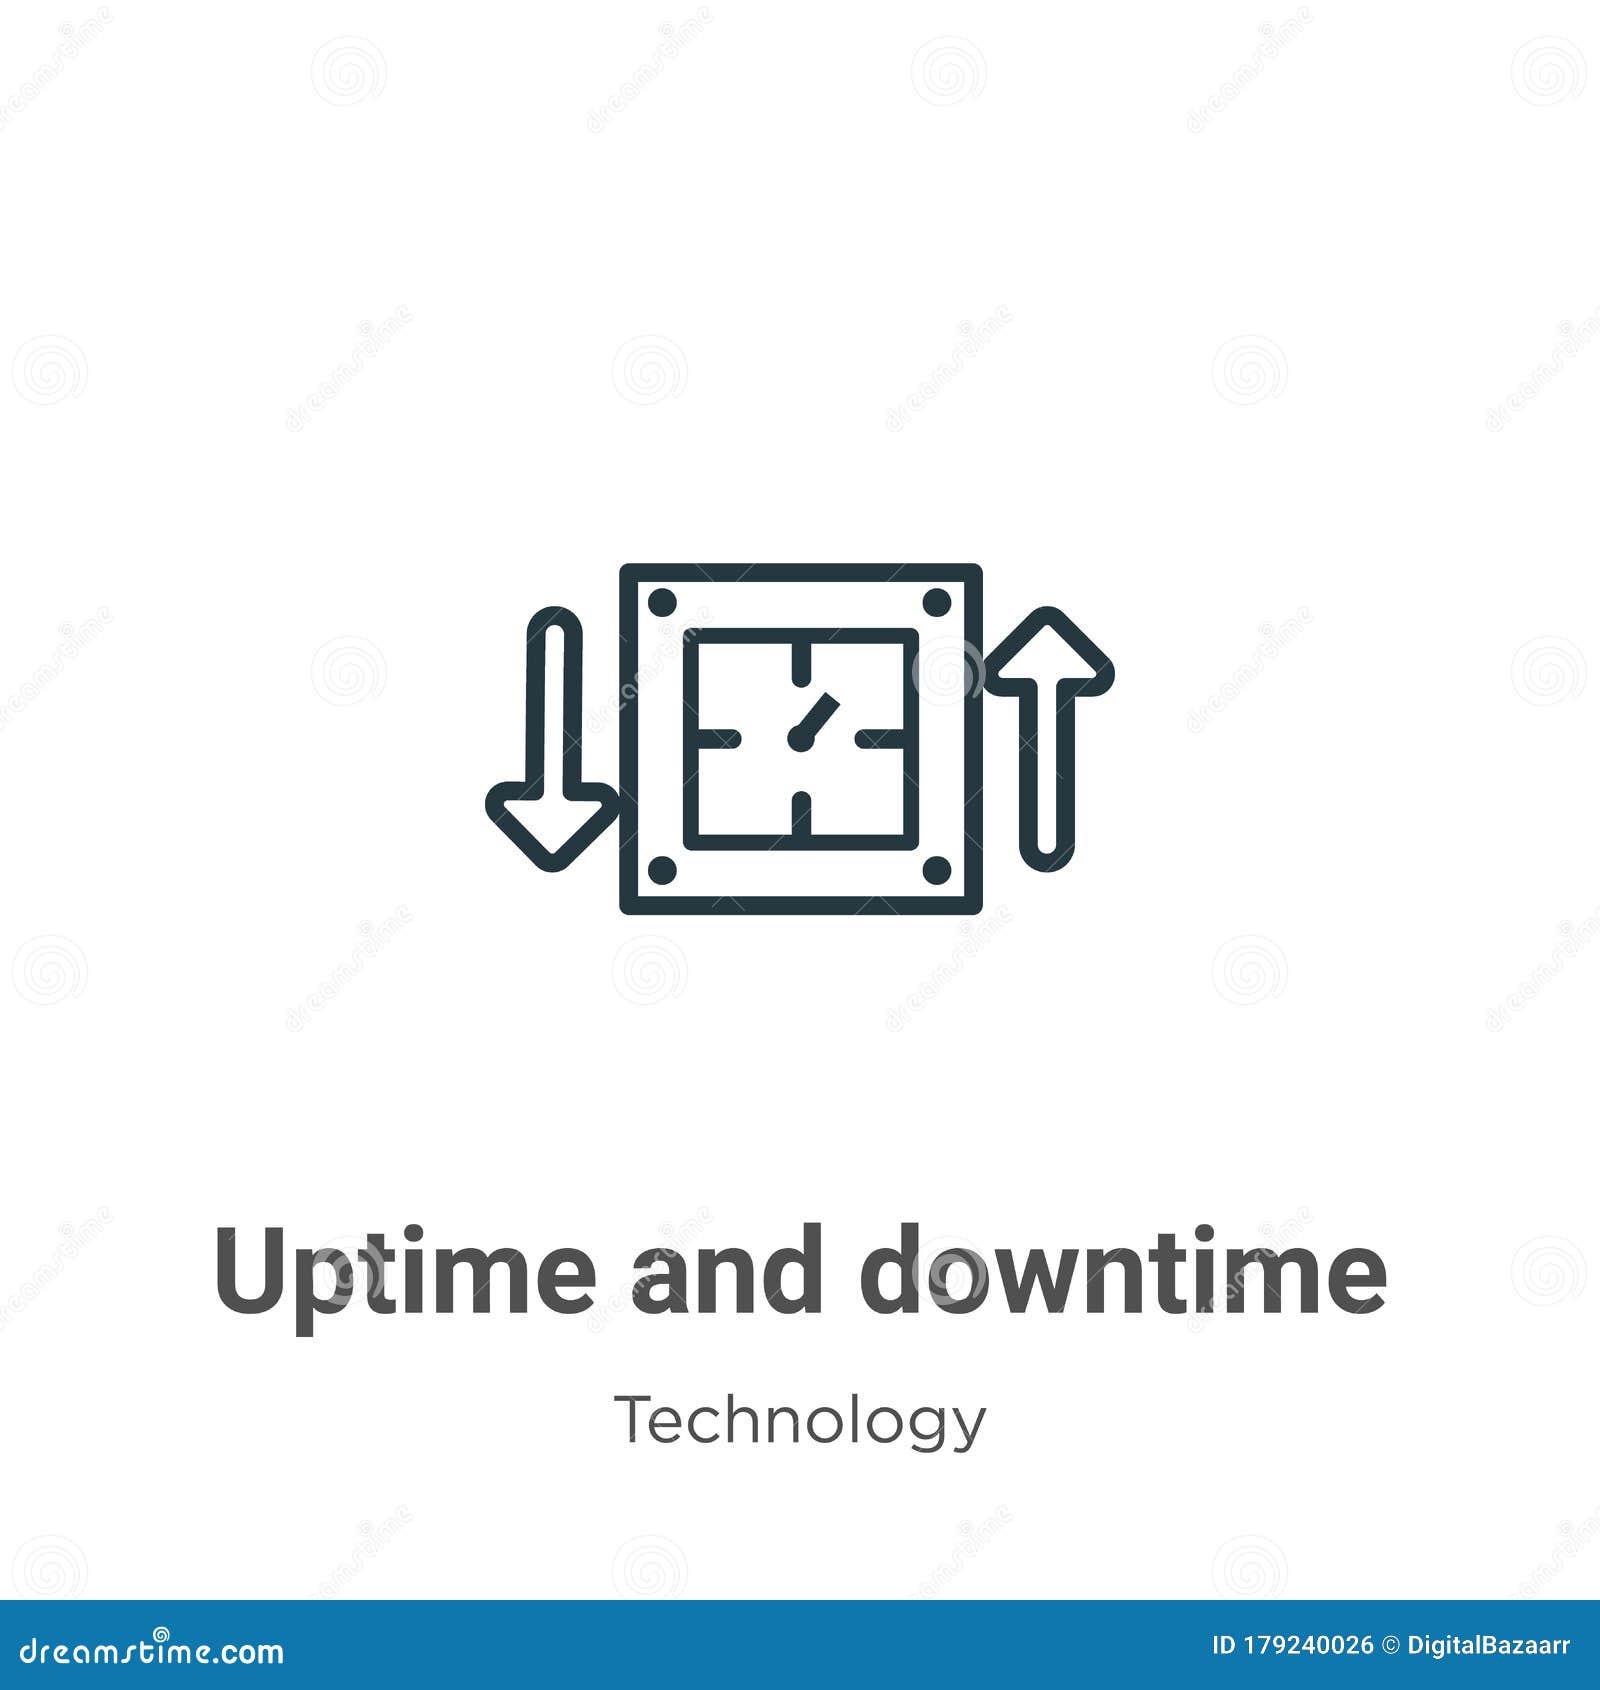 uptime and downtime outline  icon. thin line black uptime and downtime icon, flat  simple   from